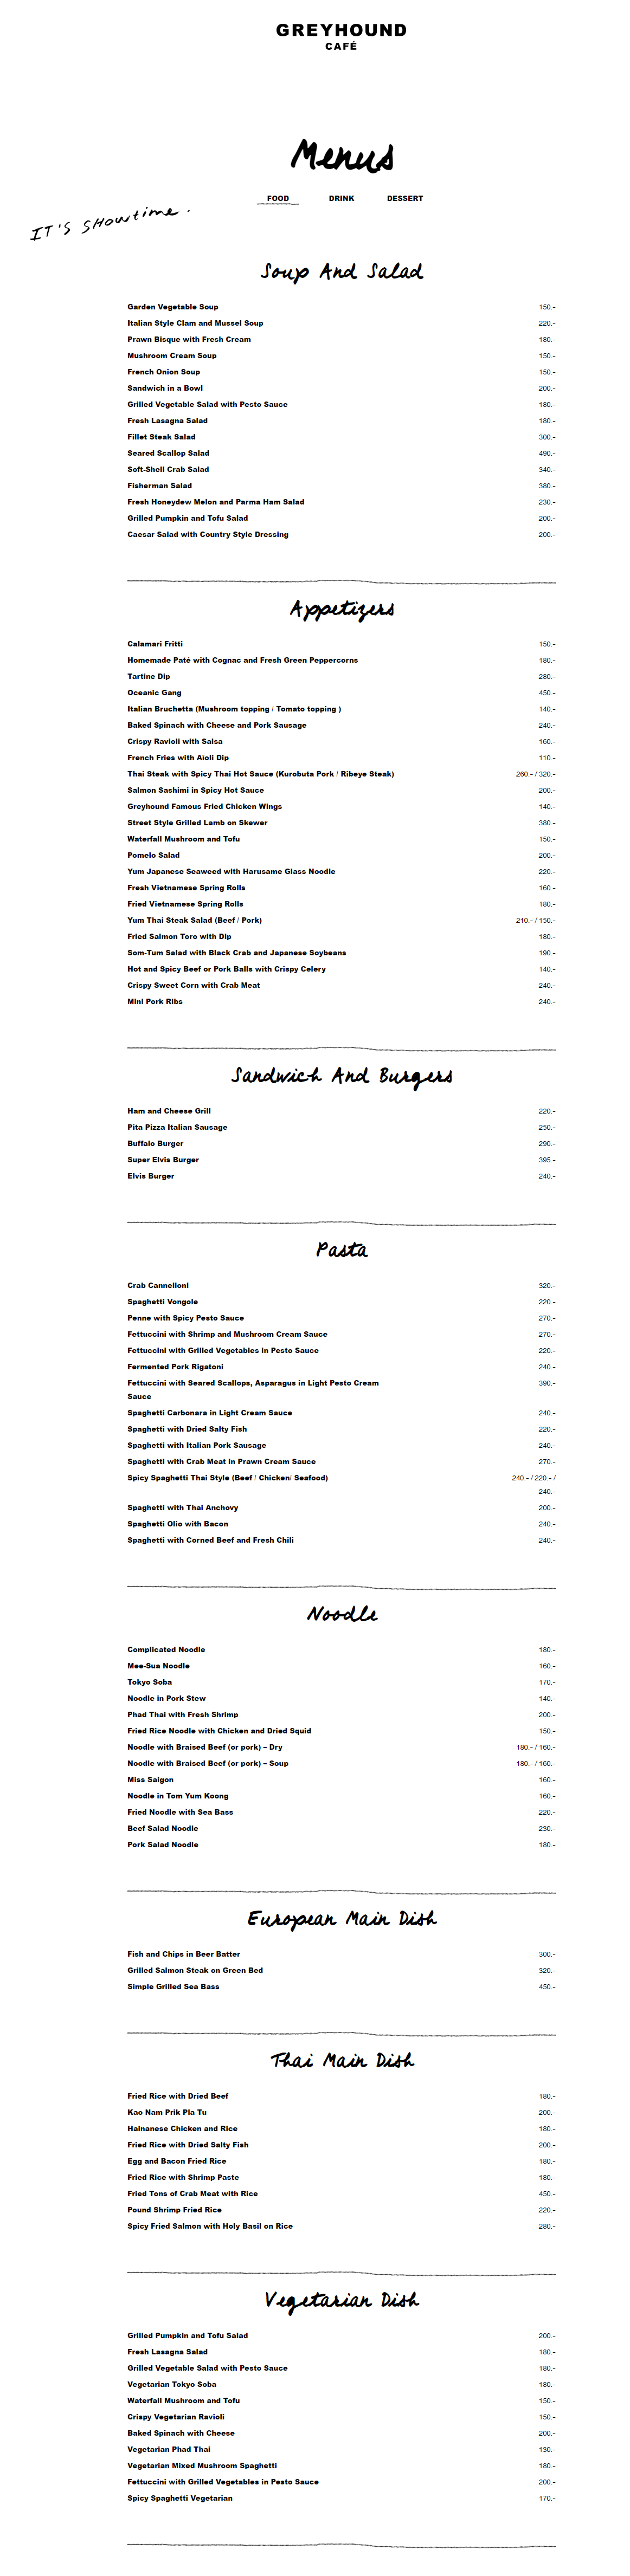 FireShot Capture 15 - Food Archives - Greyhoun_ - http___www.greyhoundcafe.co.th_menu_category...png